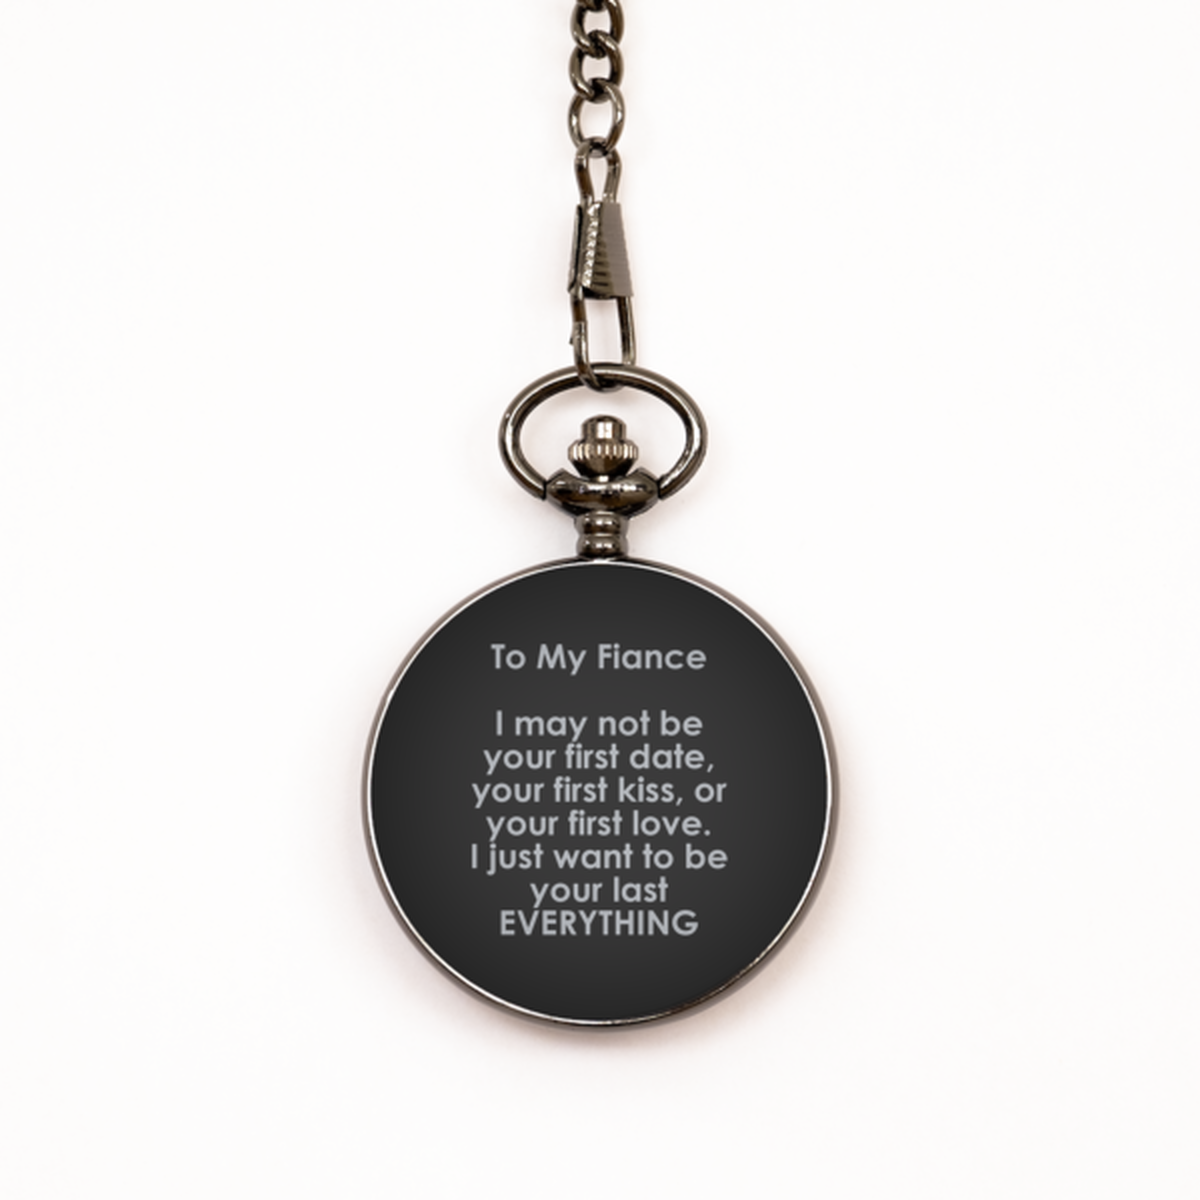 To My Fiance Black Pocket Watch, I Just Want To Be You Last Everything, Valentines  Gifts For Fiance From Fiancee, Birthday Gifts For Men